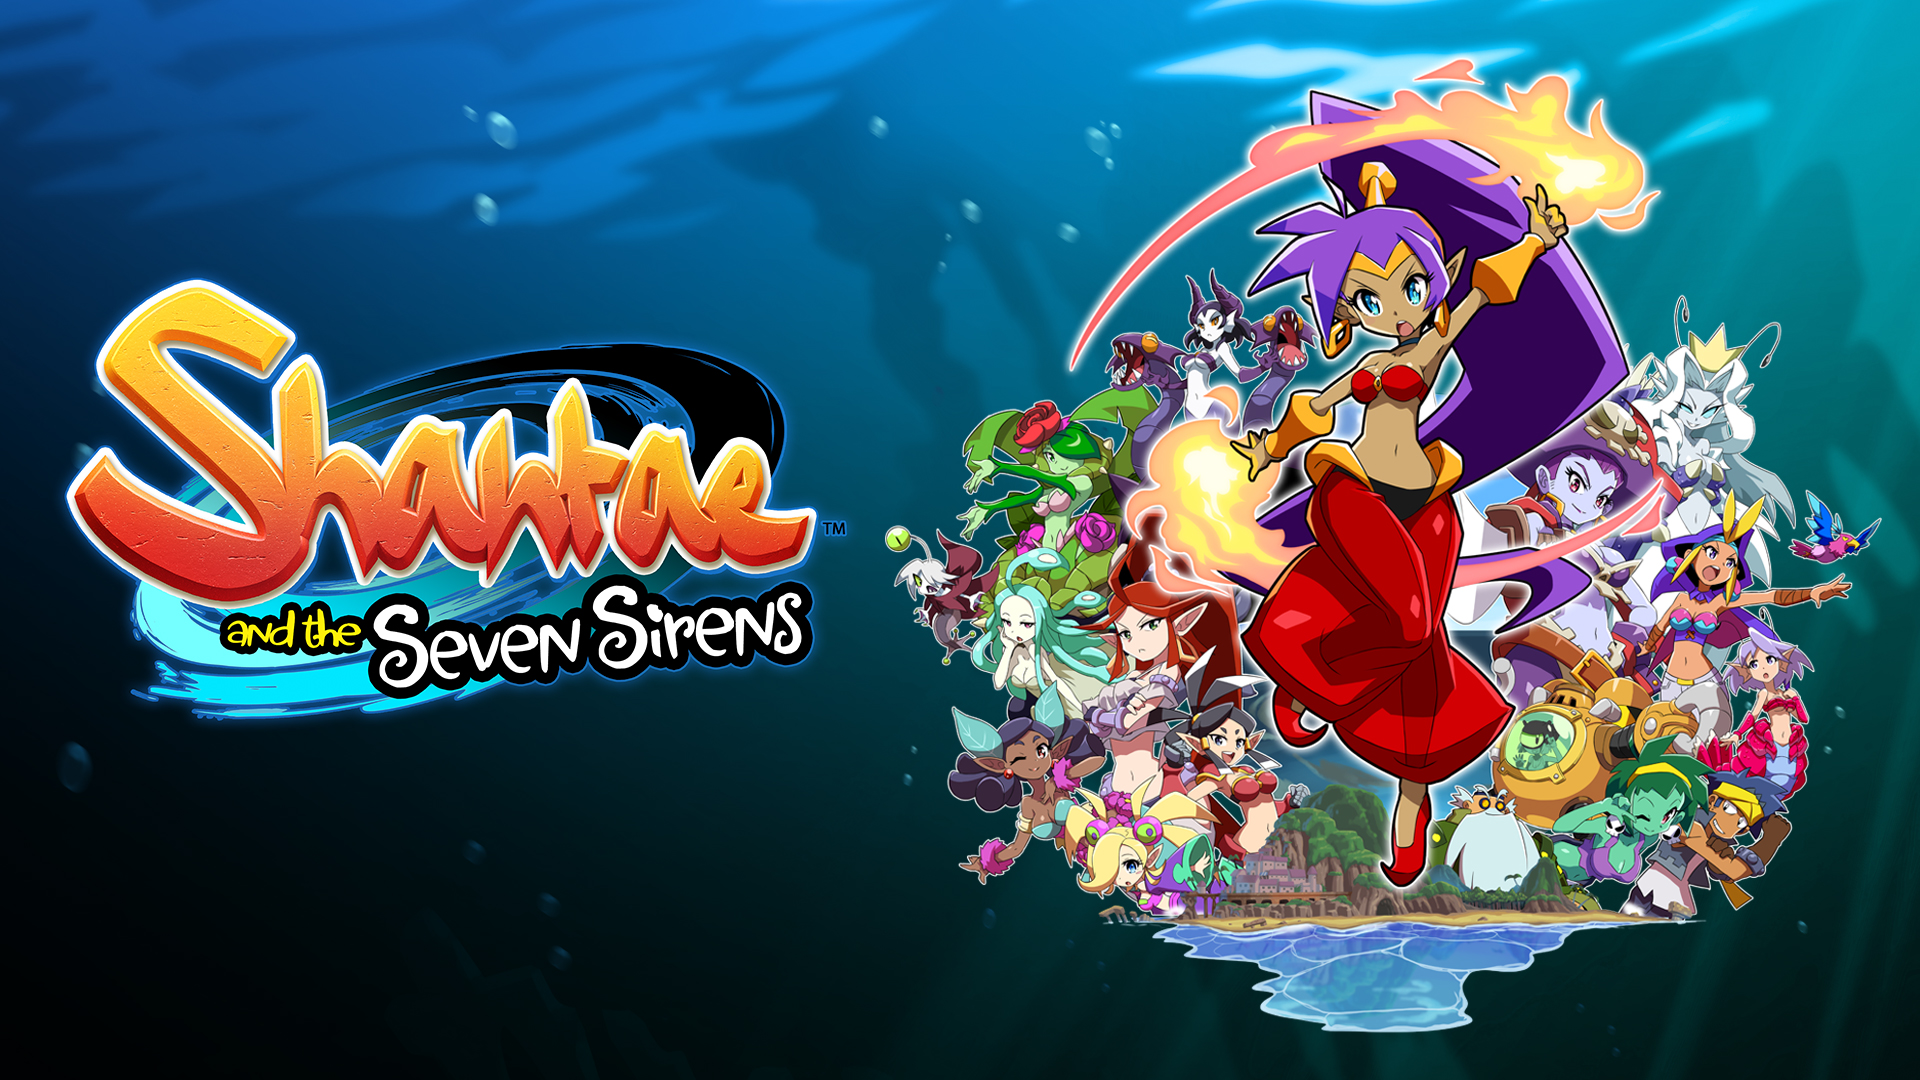 Shantae and the Seven Sirens - more gameplay